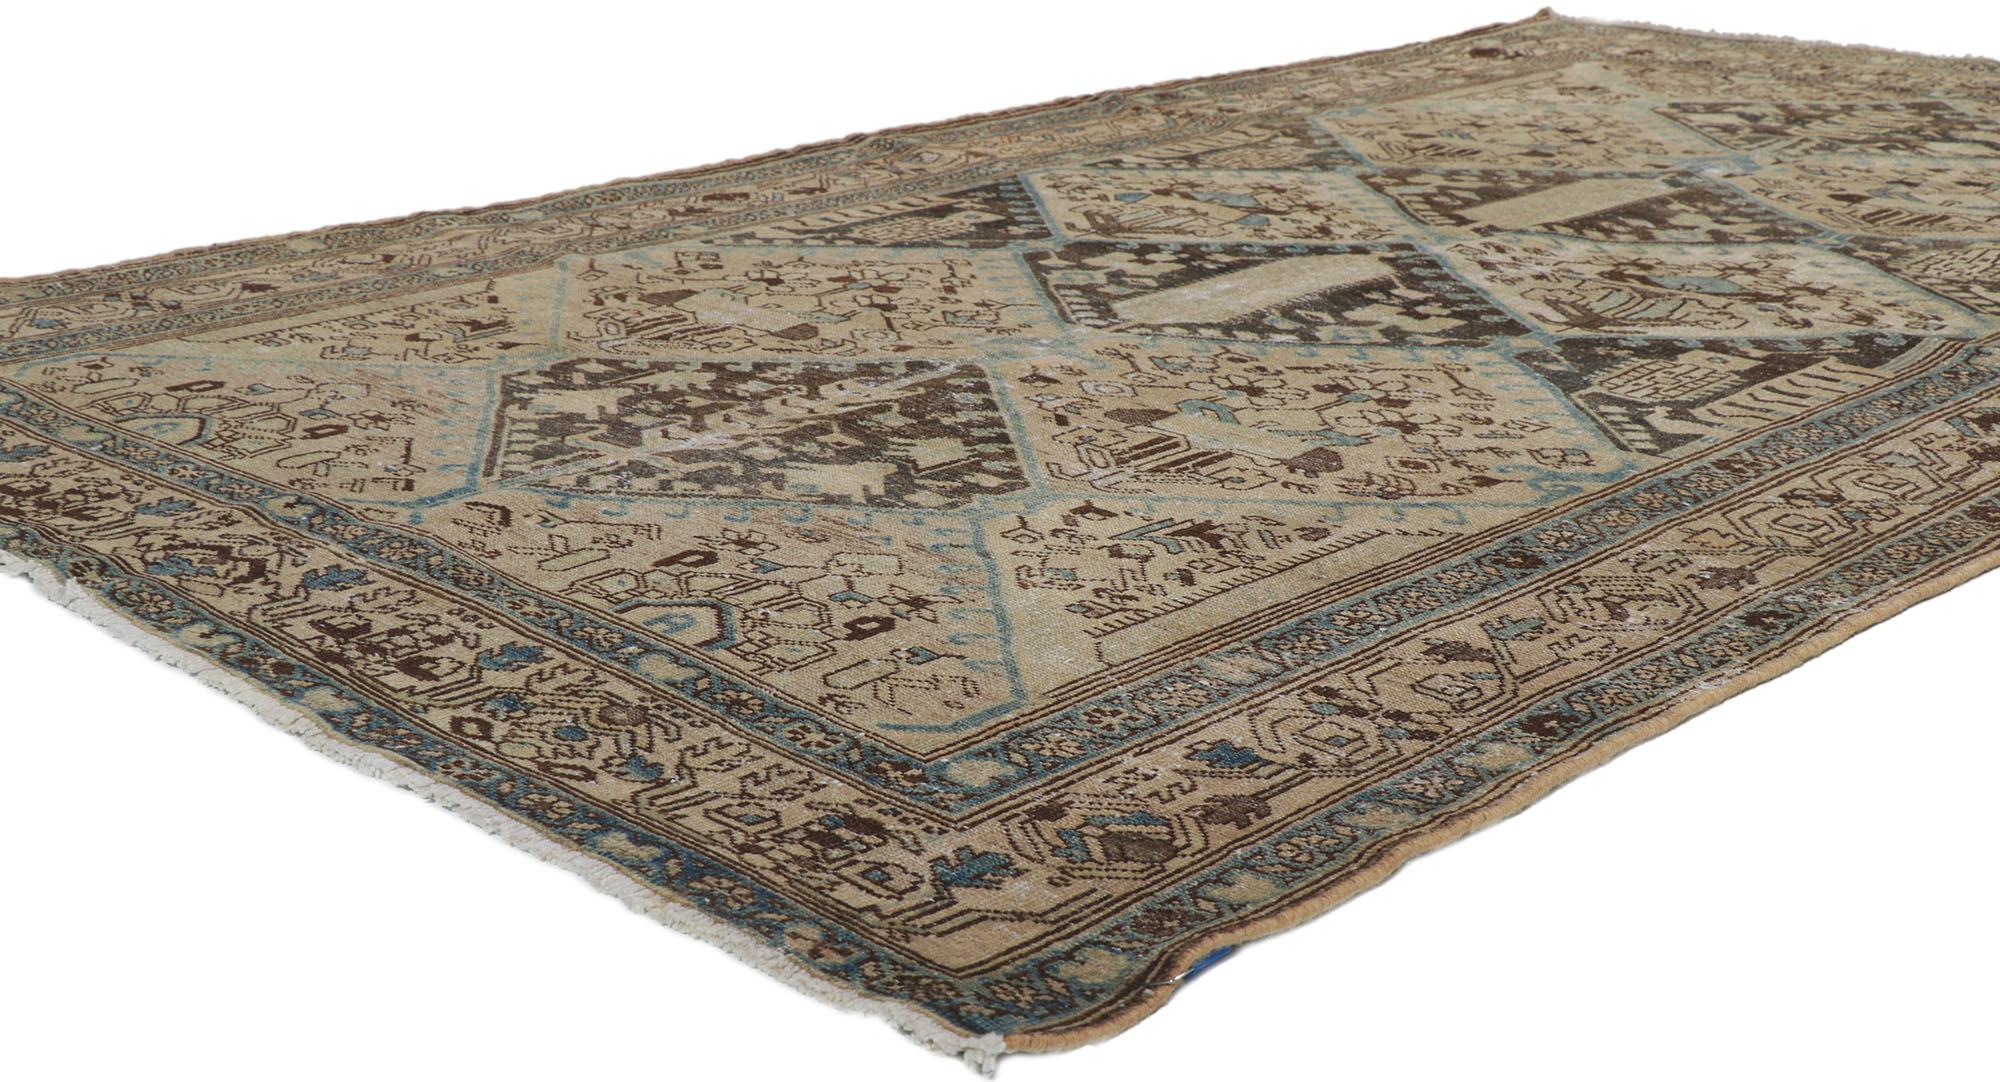 60983 Distressed Antique Persian Malayer rug 05'06 x 09'02. Emanating sophistication and grace with rustic sensibility, this hand knotted wool distressed antique Persian Malayer rug will take on a curated lived-in look that feels timeless while